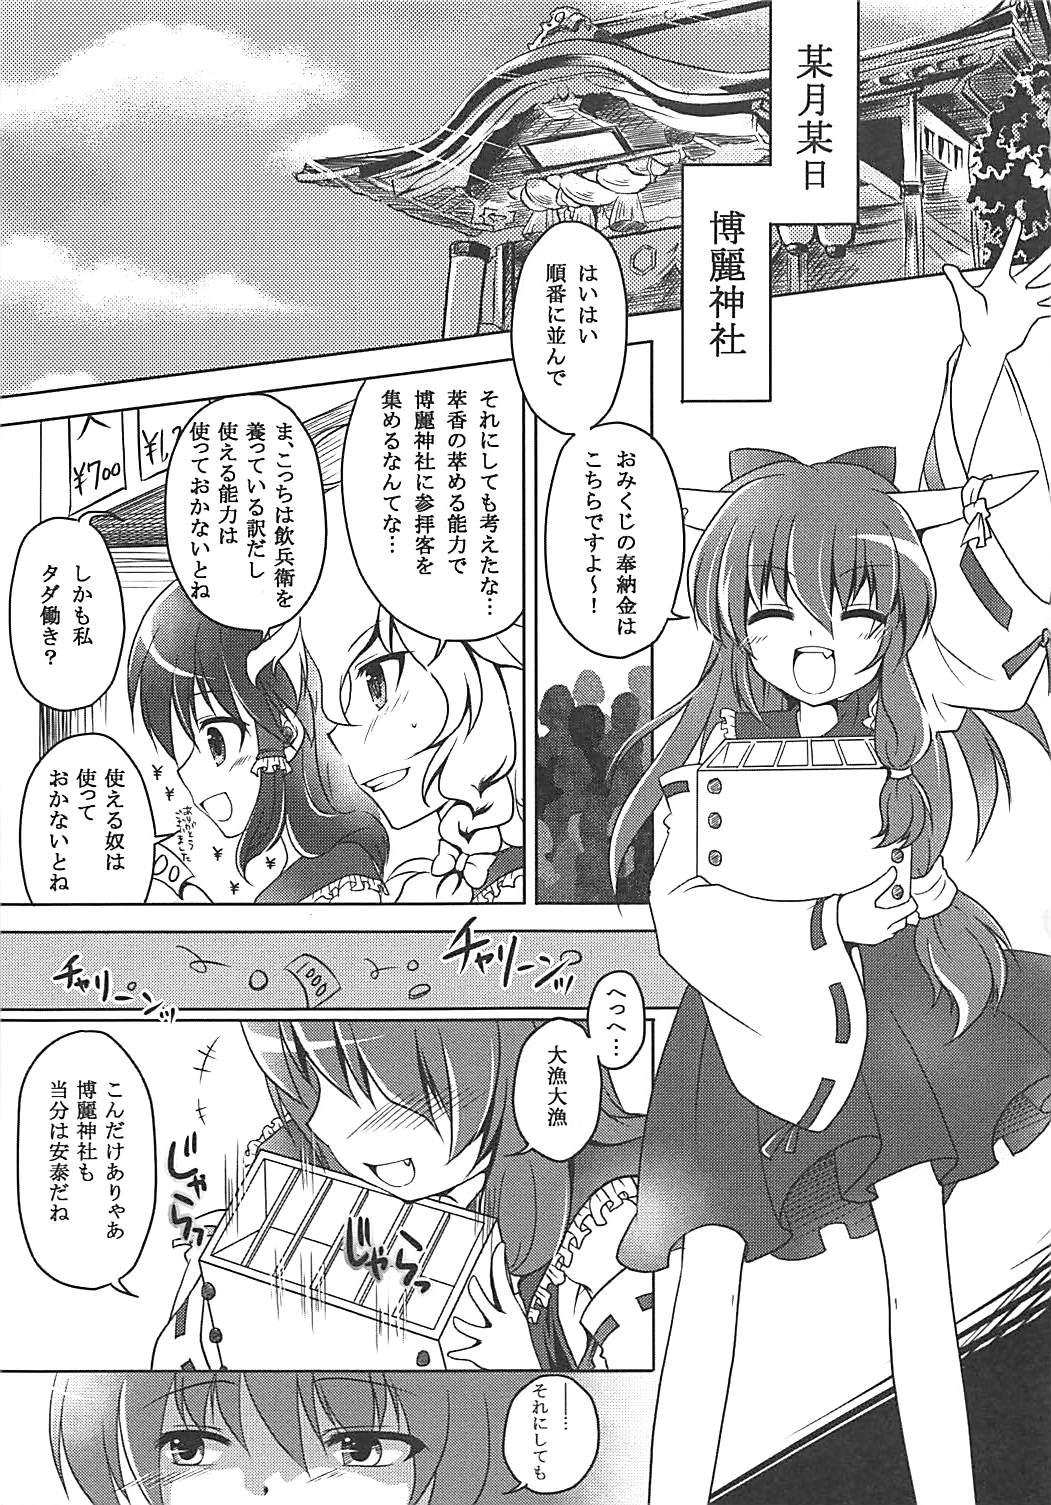 Sharing Suimiko Suika. - Touhou project Interracial Sex - Page 2